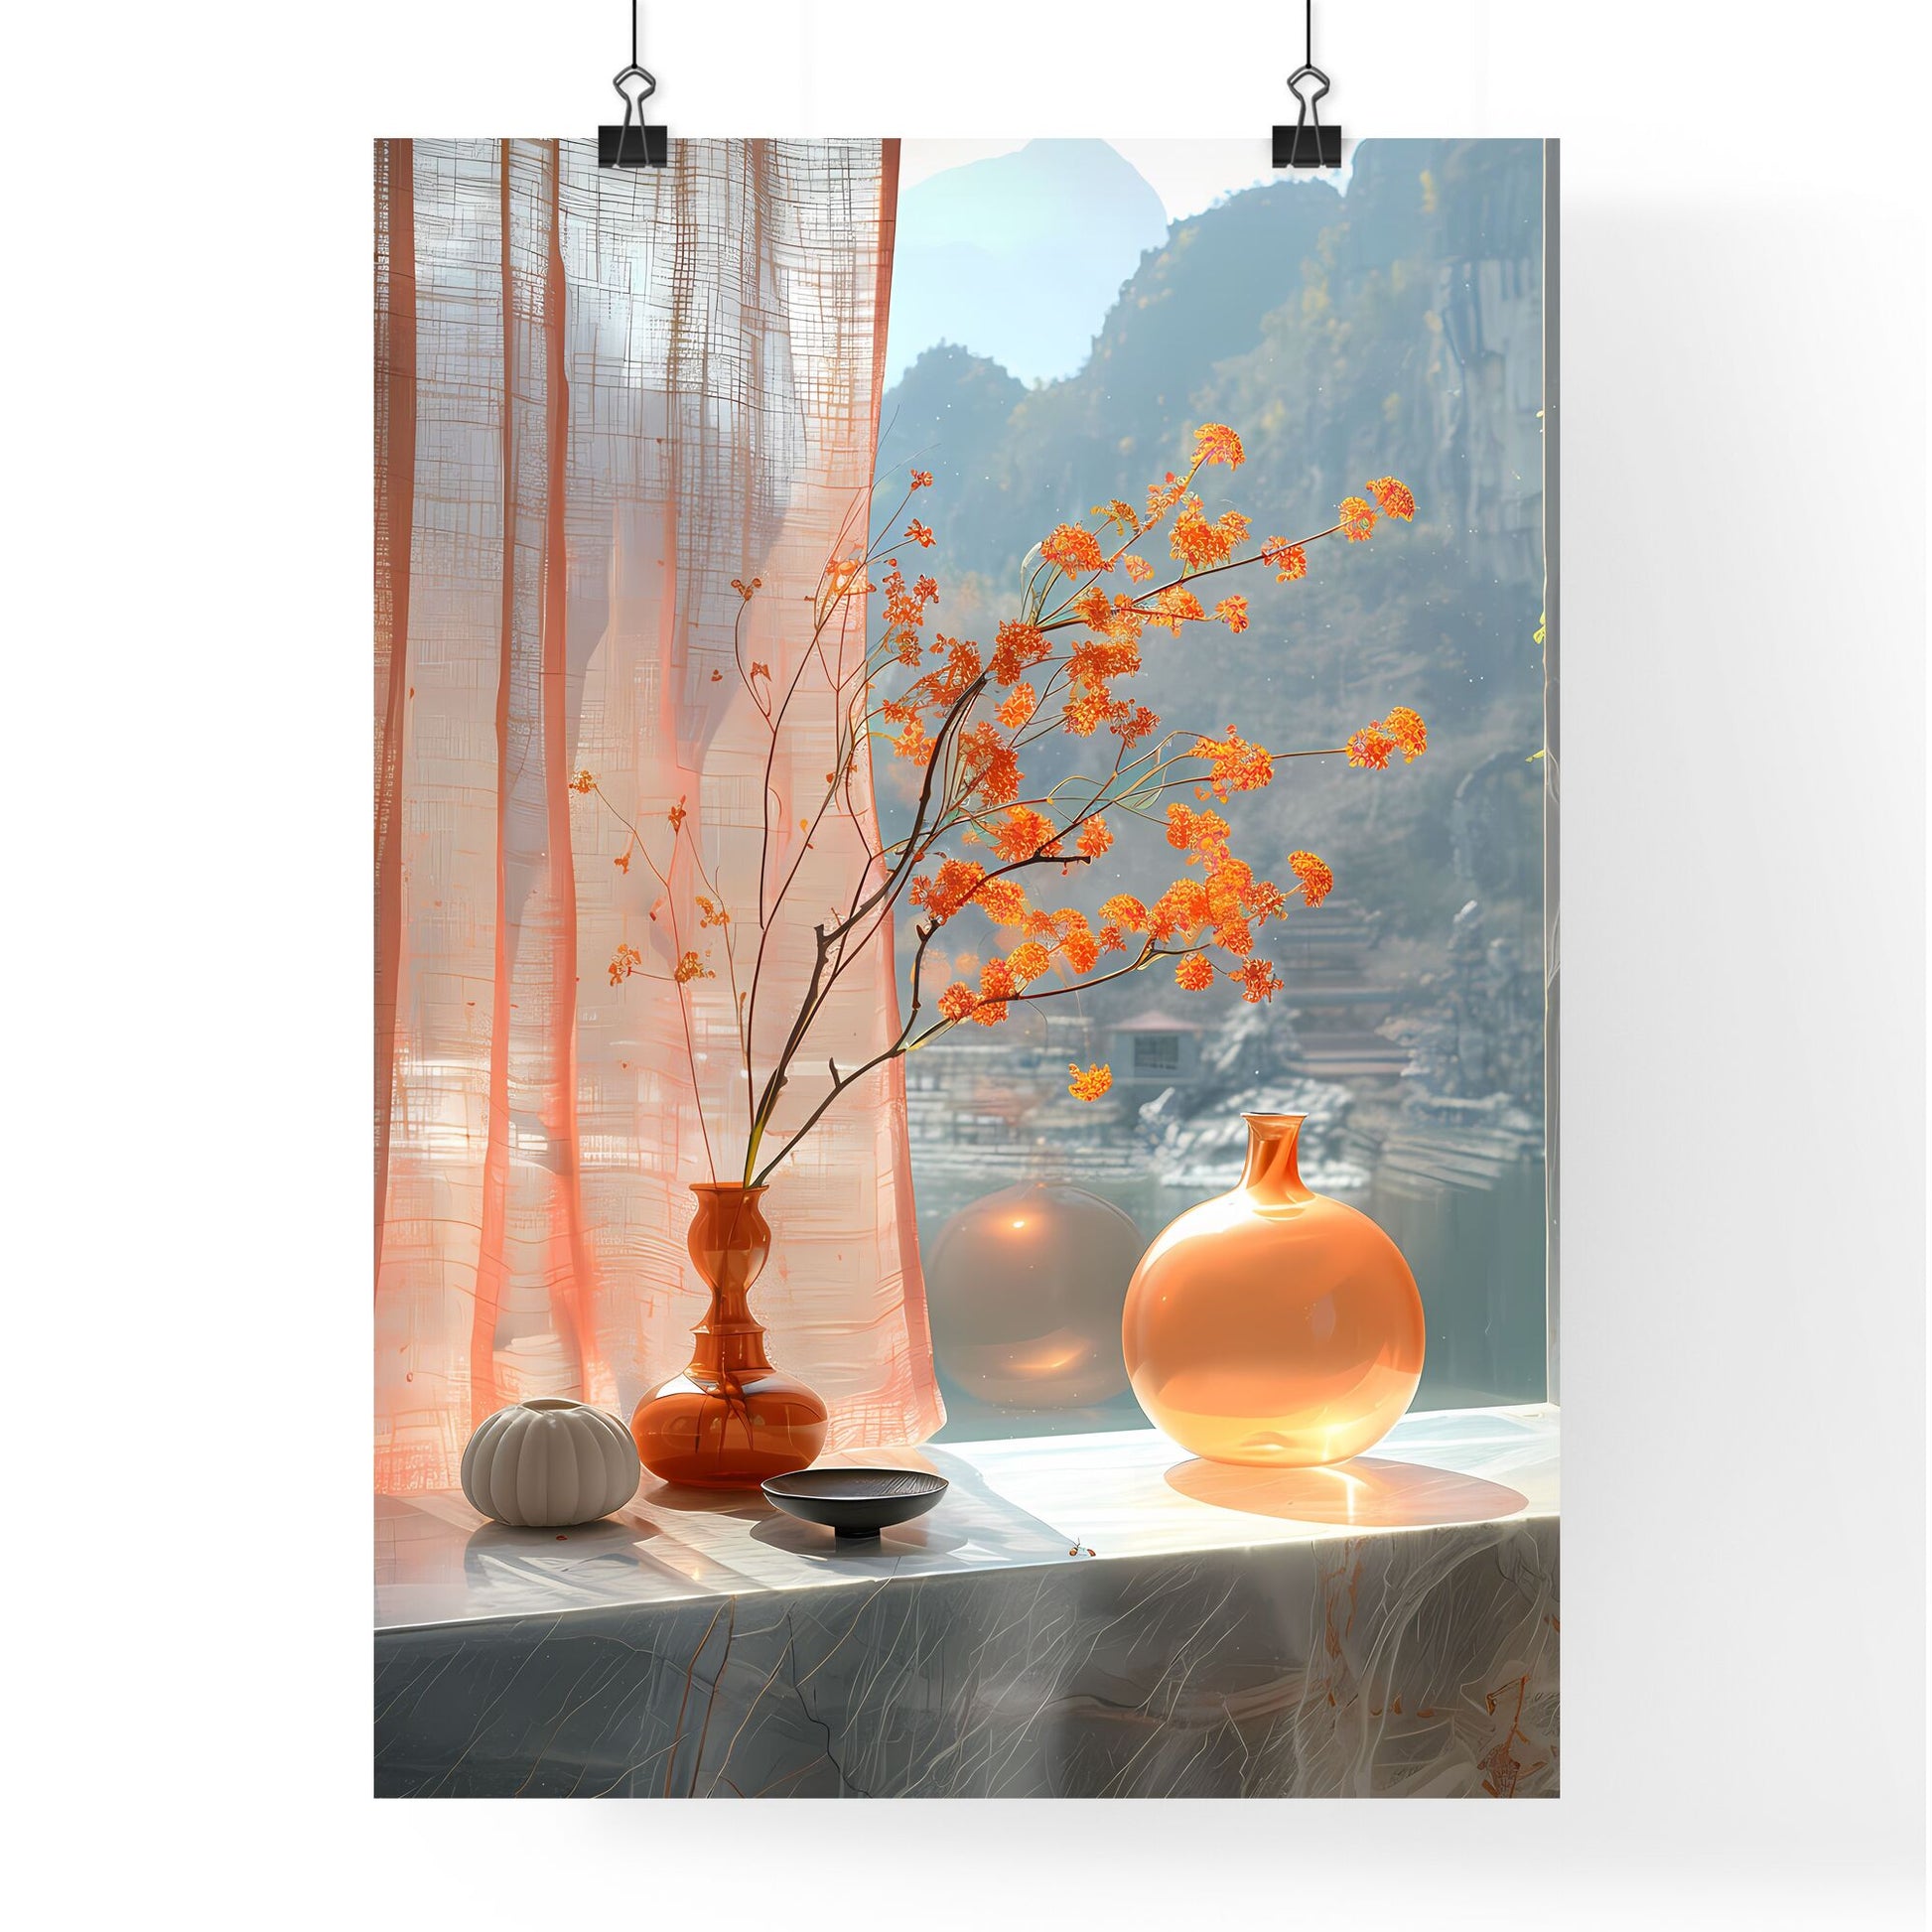 Cubist-Inspired Still Life: Orange Flowers in a Vase, Window Sill, Ink Painting, Light Track Photography, Realistic Art Default Title